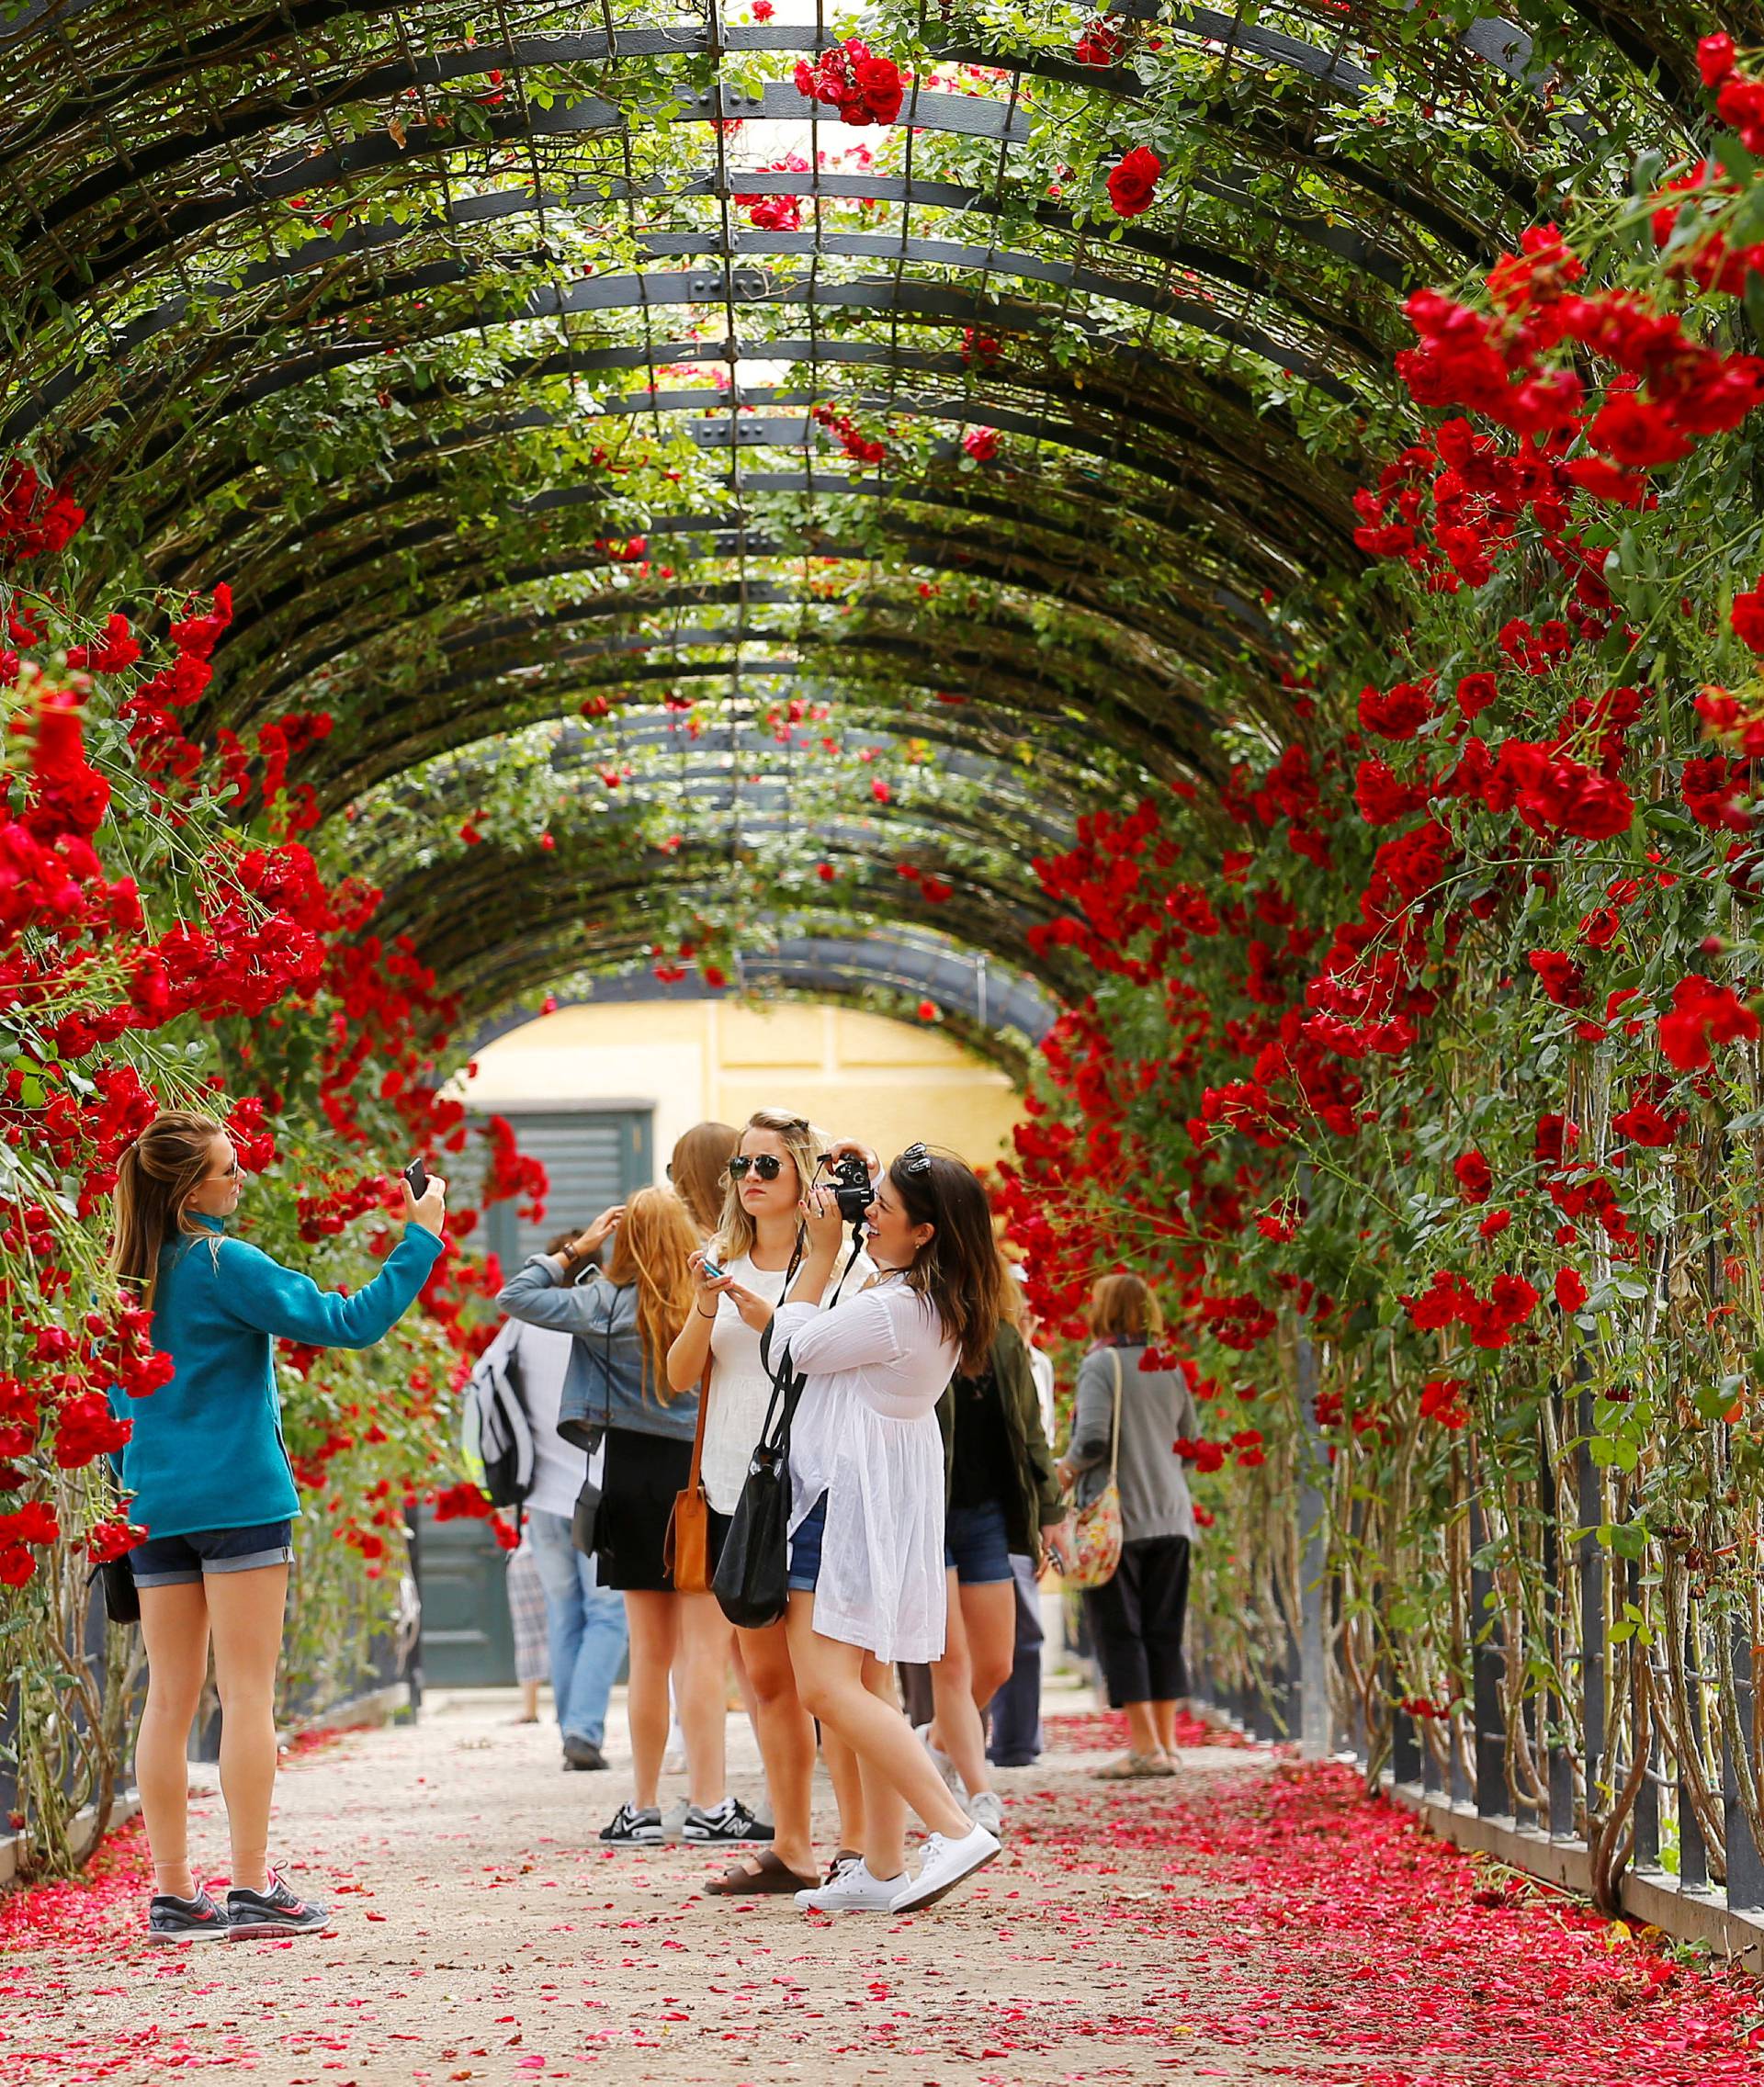 Tourists pose for photographs at the rose tunnel in the park of Schoenbrun palace in Vienna